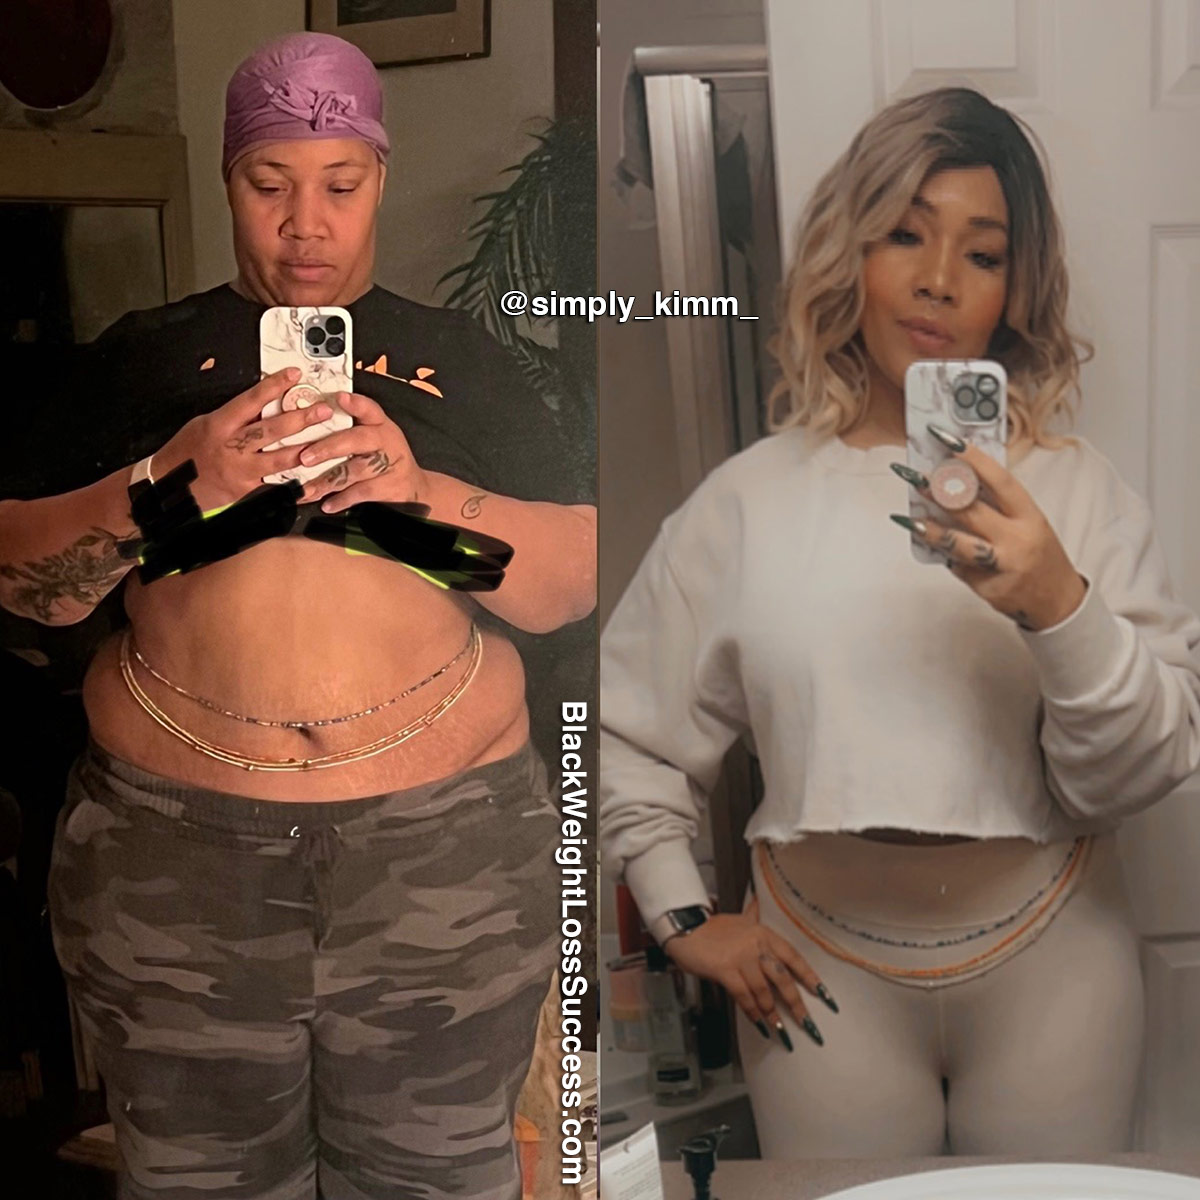 Kimm before and after weight loss